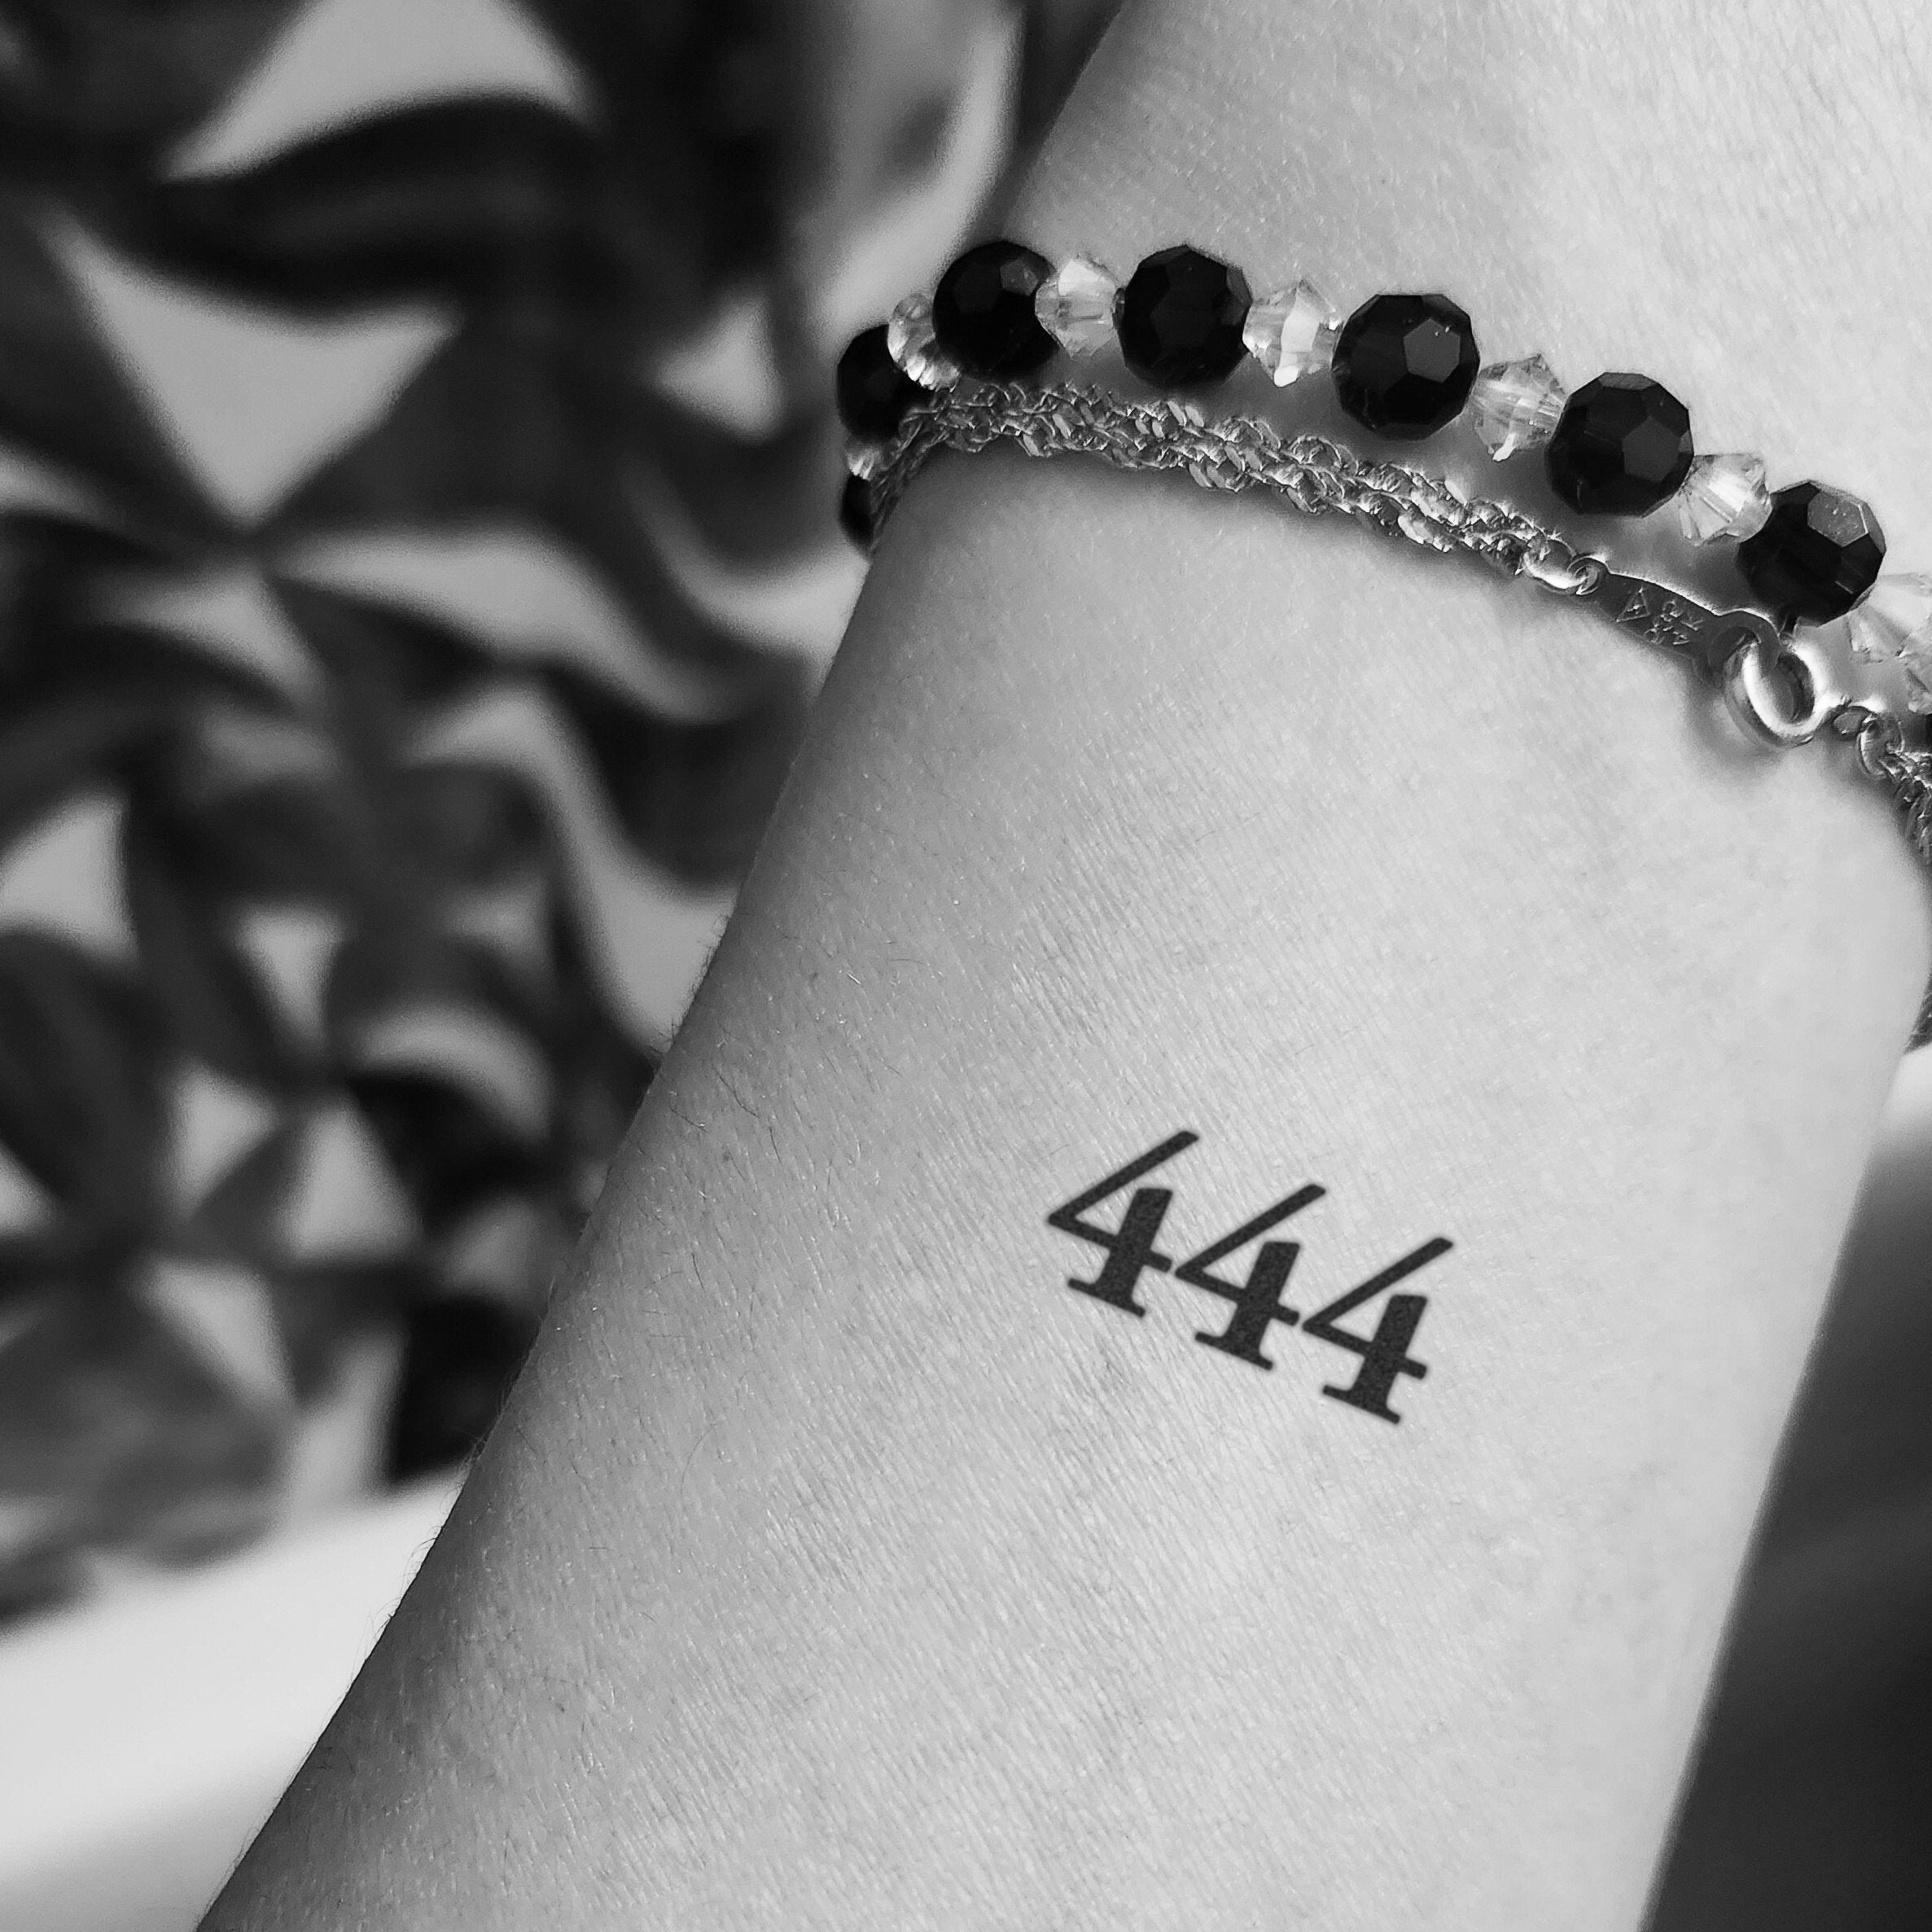 444 Angel Number Tattoo Ideas For Meaningful Ink  Tarot Card Reading  Counseling Life Coach Feng Shui  Amazing Tarot